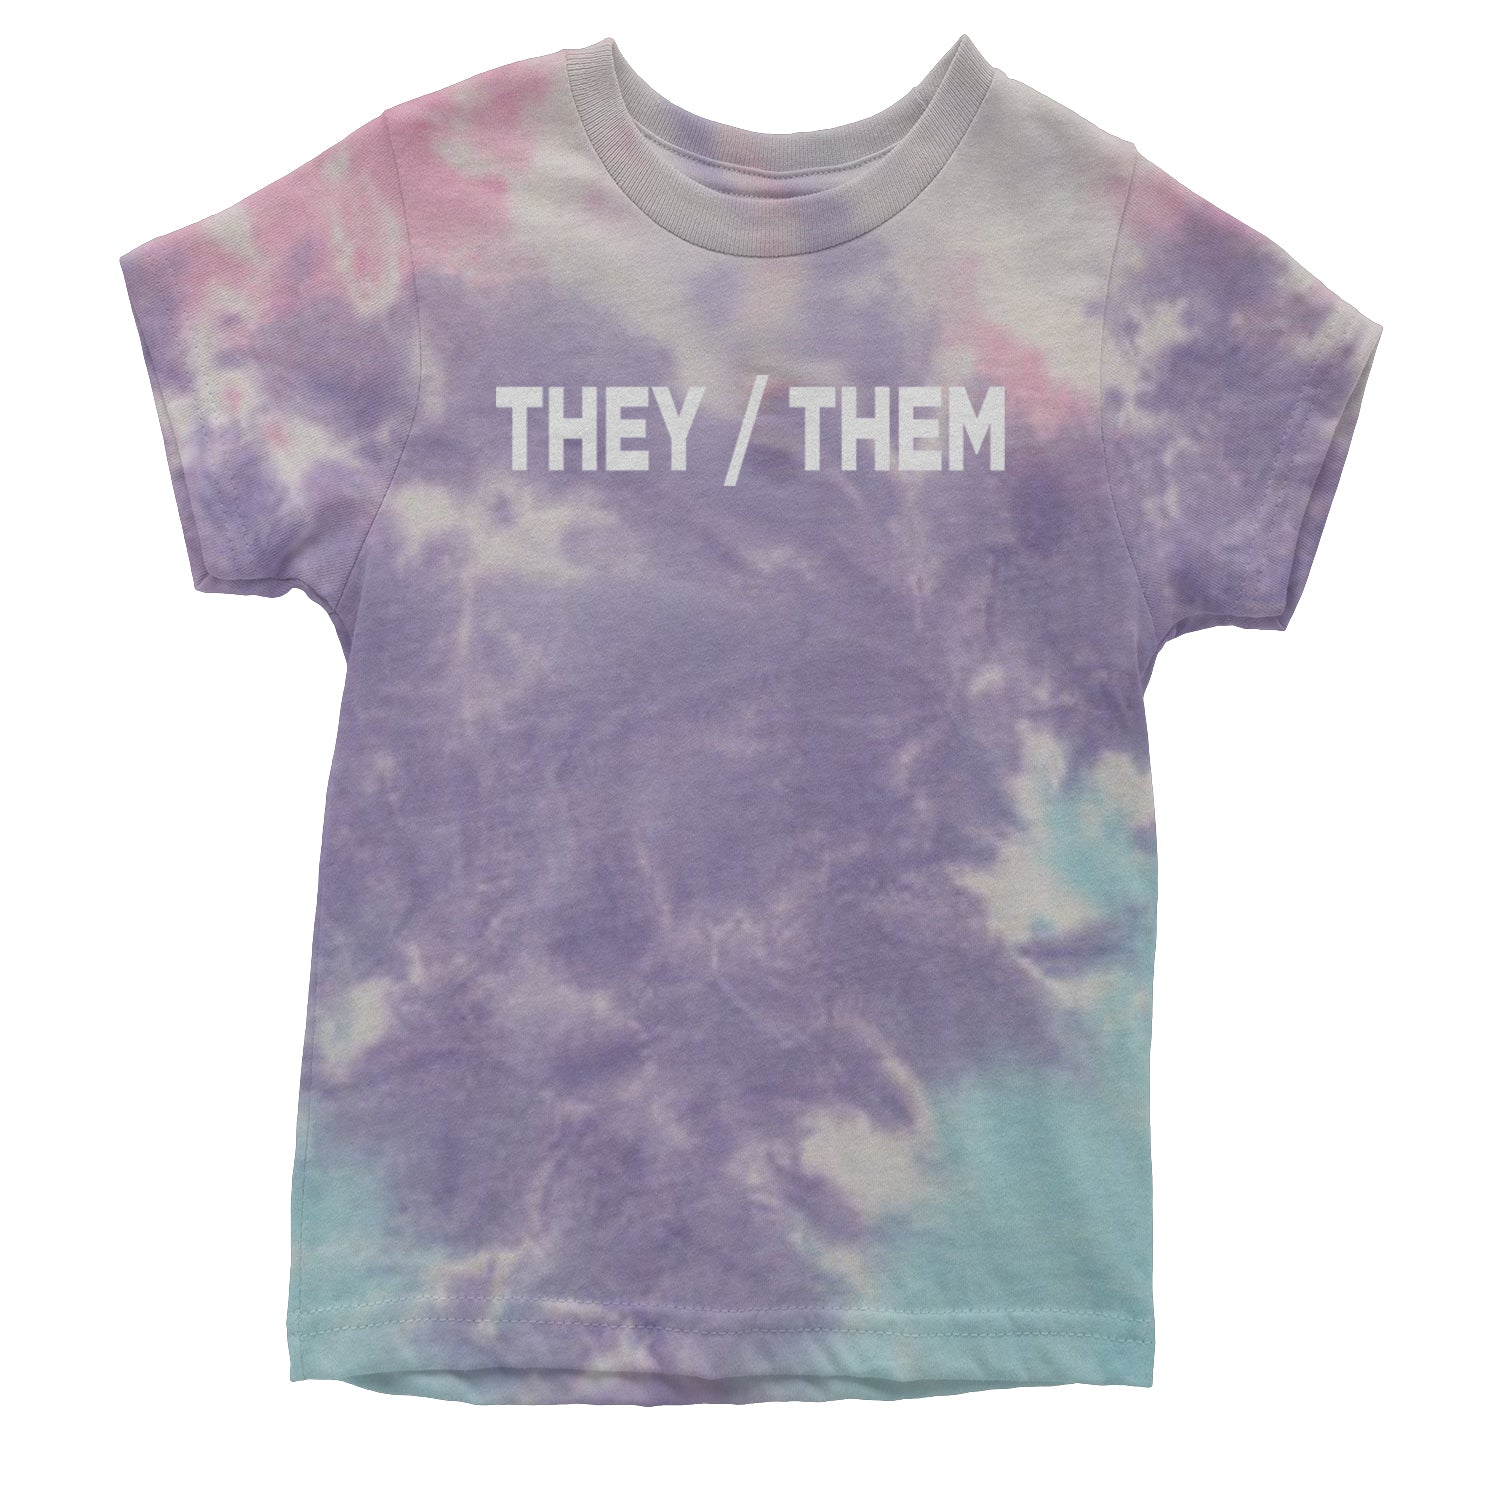 They Them Gender Pronouns Diversity and Inclusion Youth T-shirt binary, civil, gay, he, her, him, nonbinary, pride, rights, she, them, they by Expression Tees